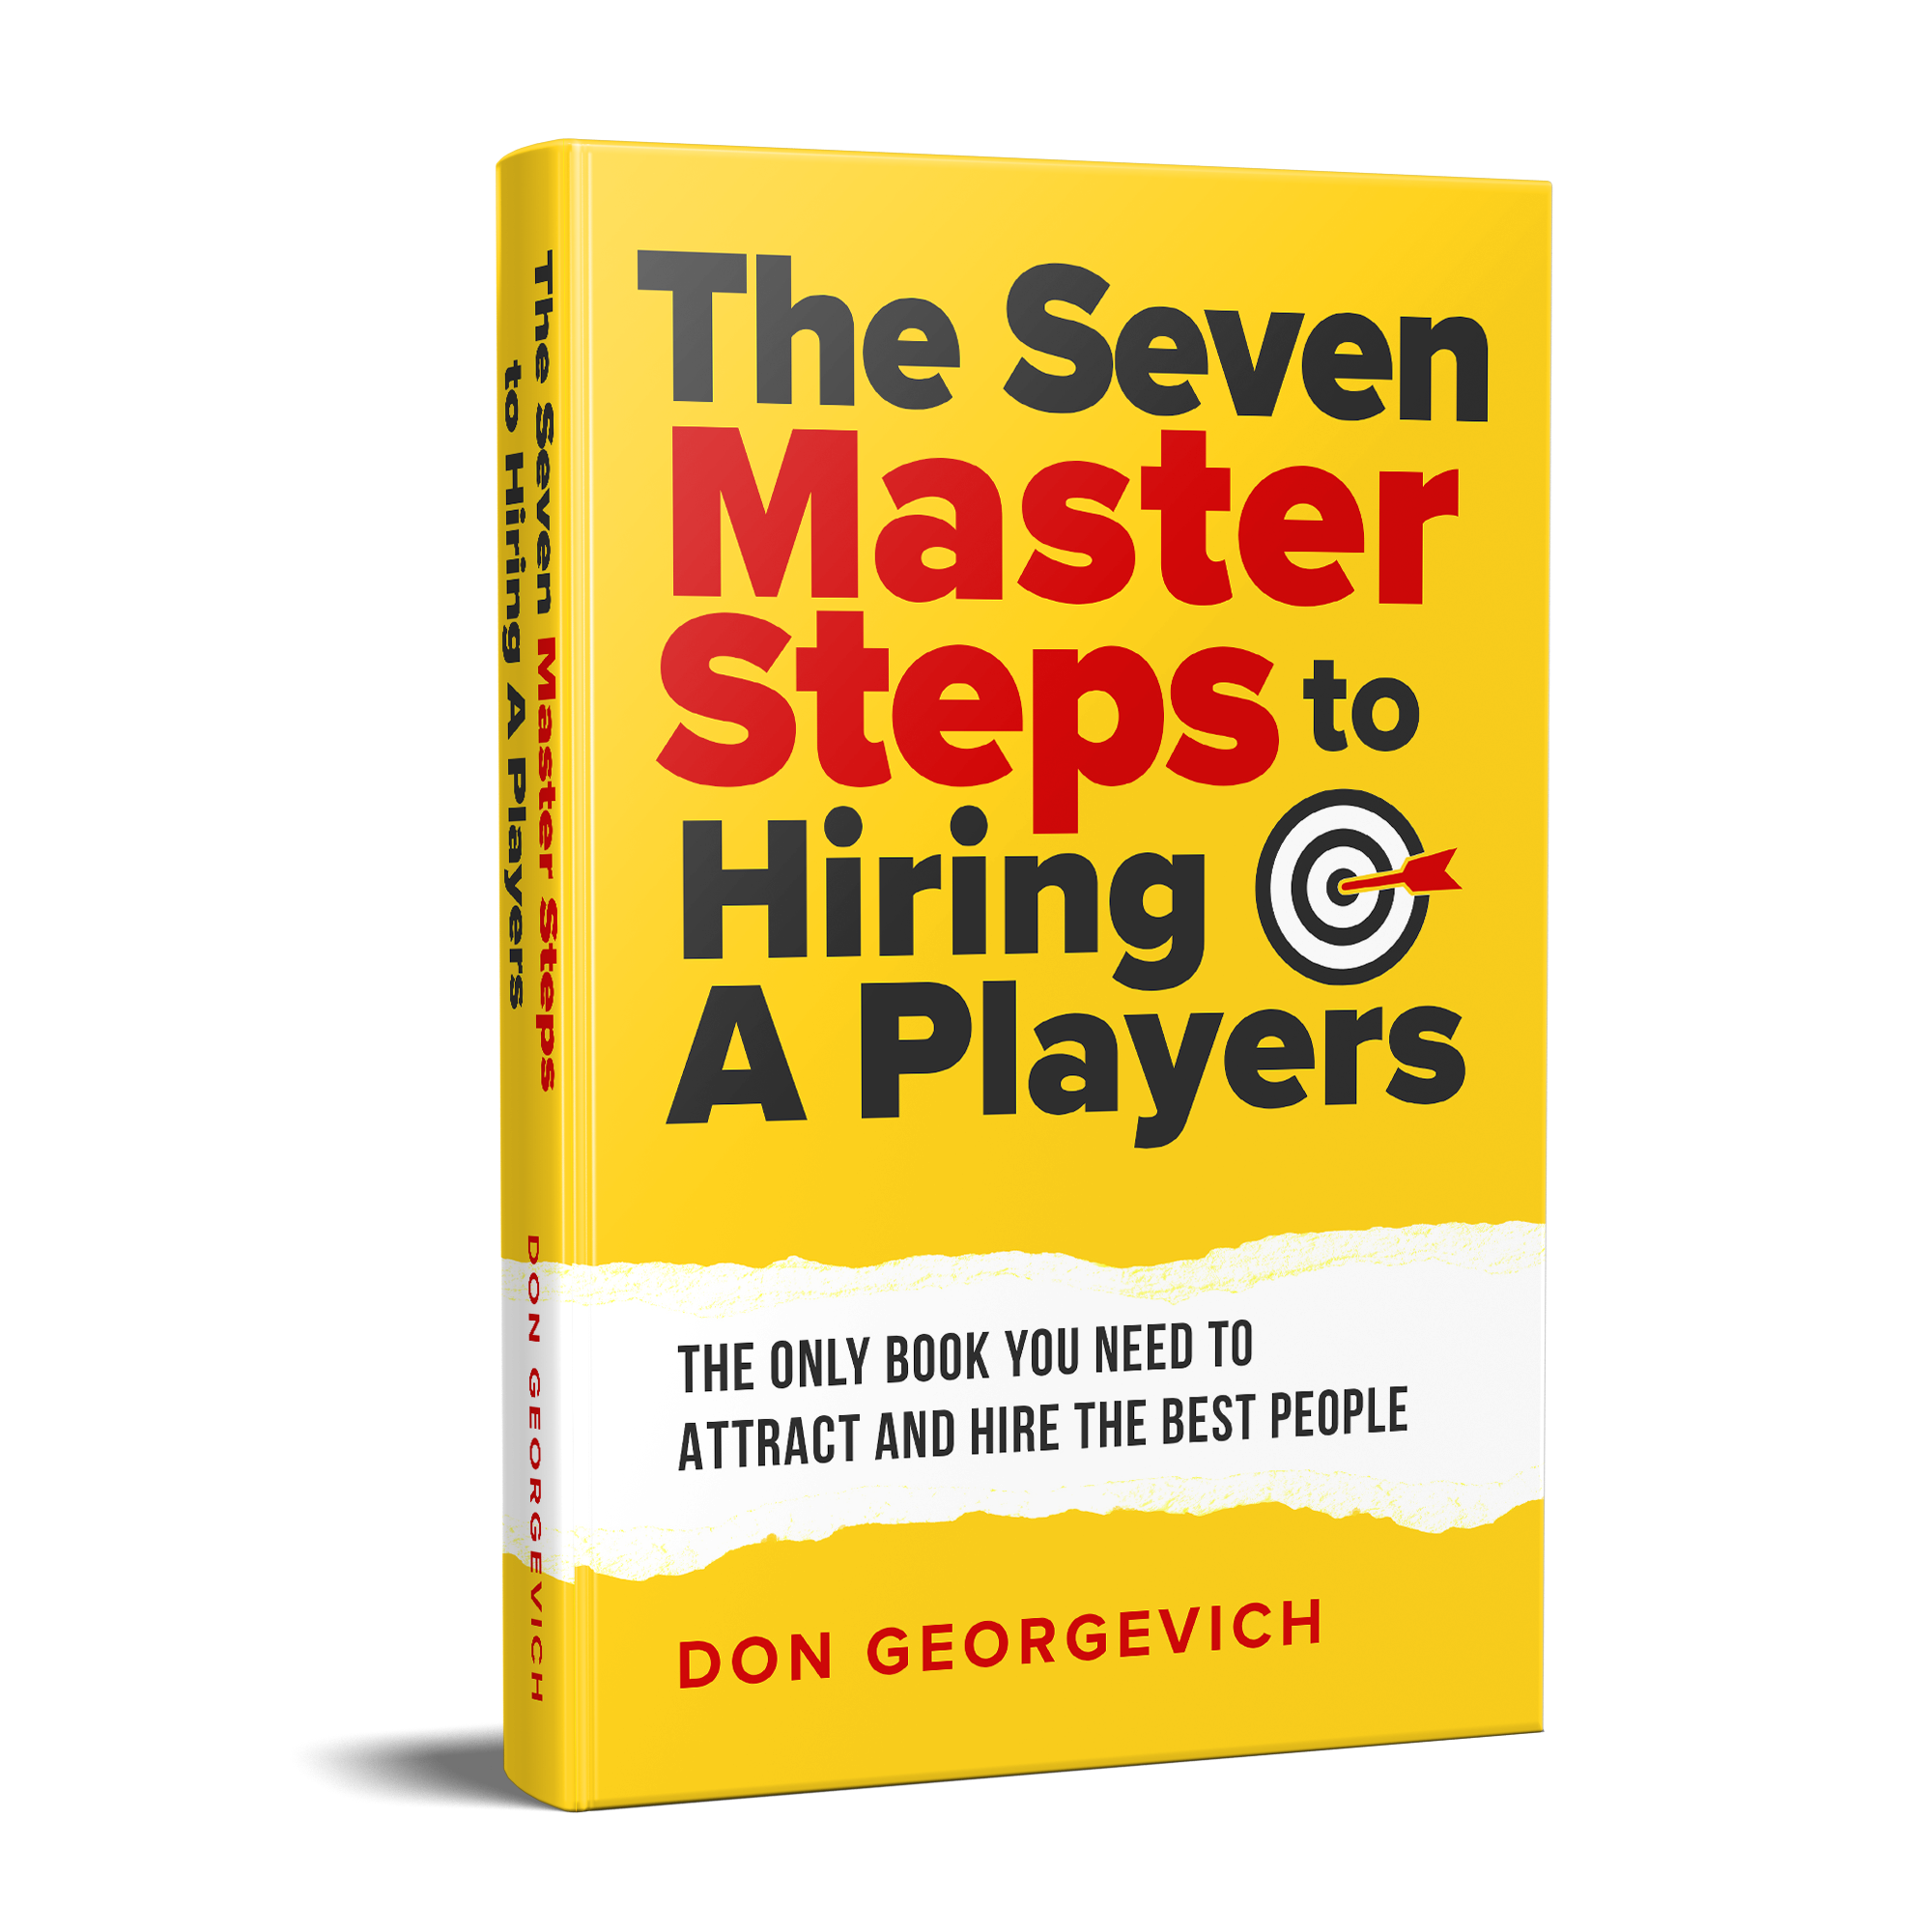 The Seven Master Steps to Hiring A Players